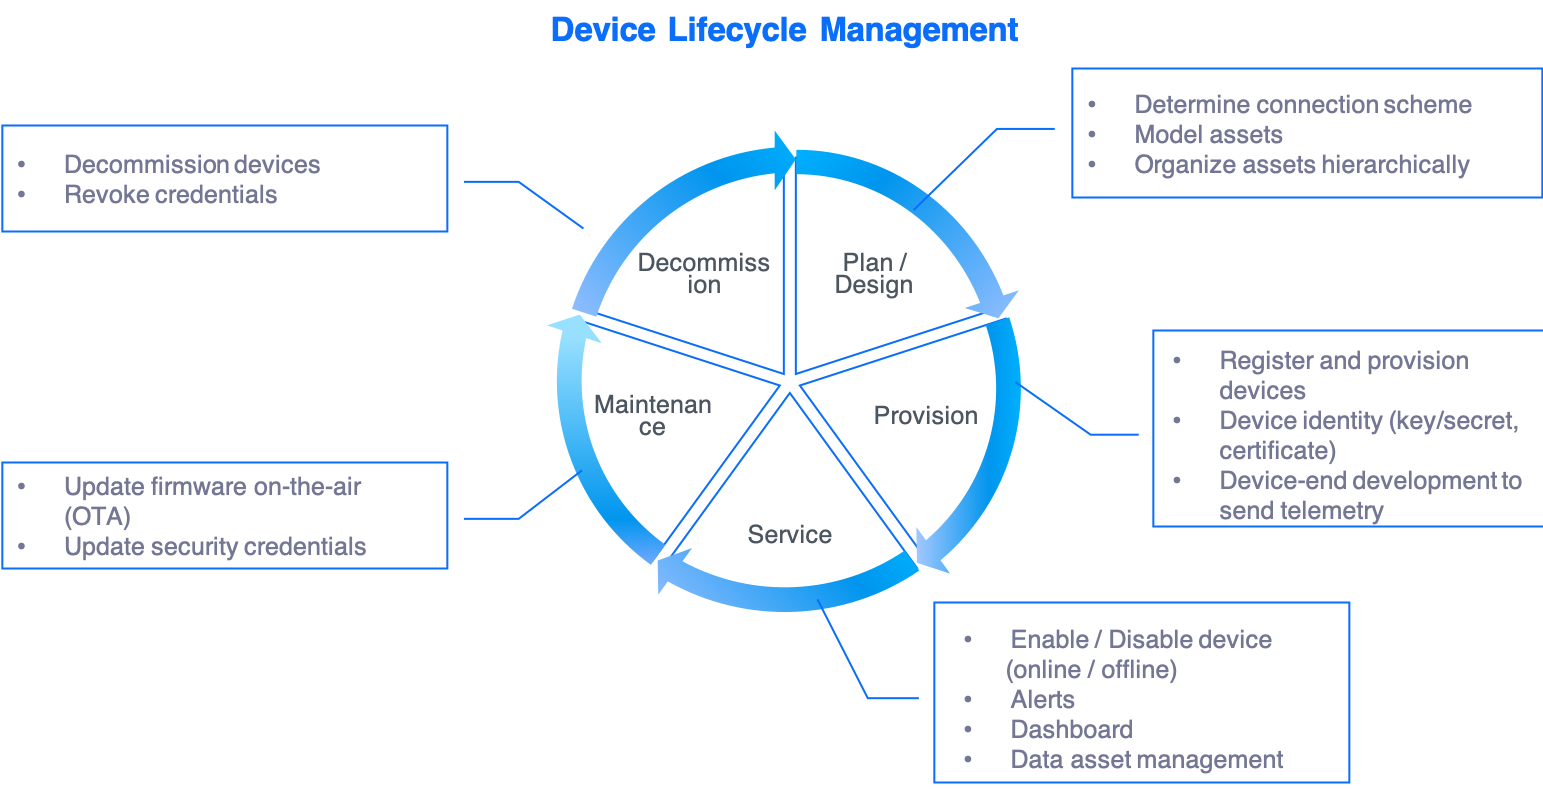 ../_images/device_lifecycle_management.png